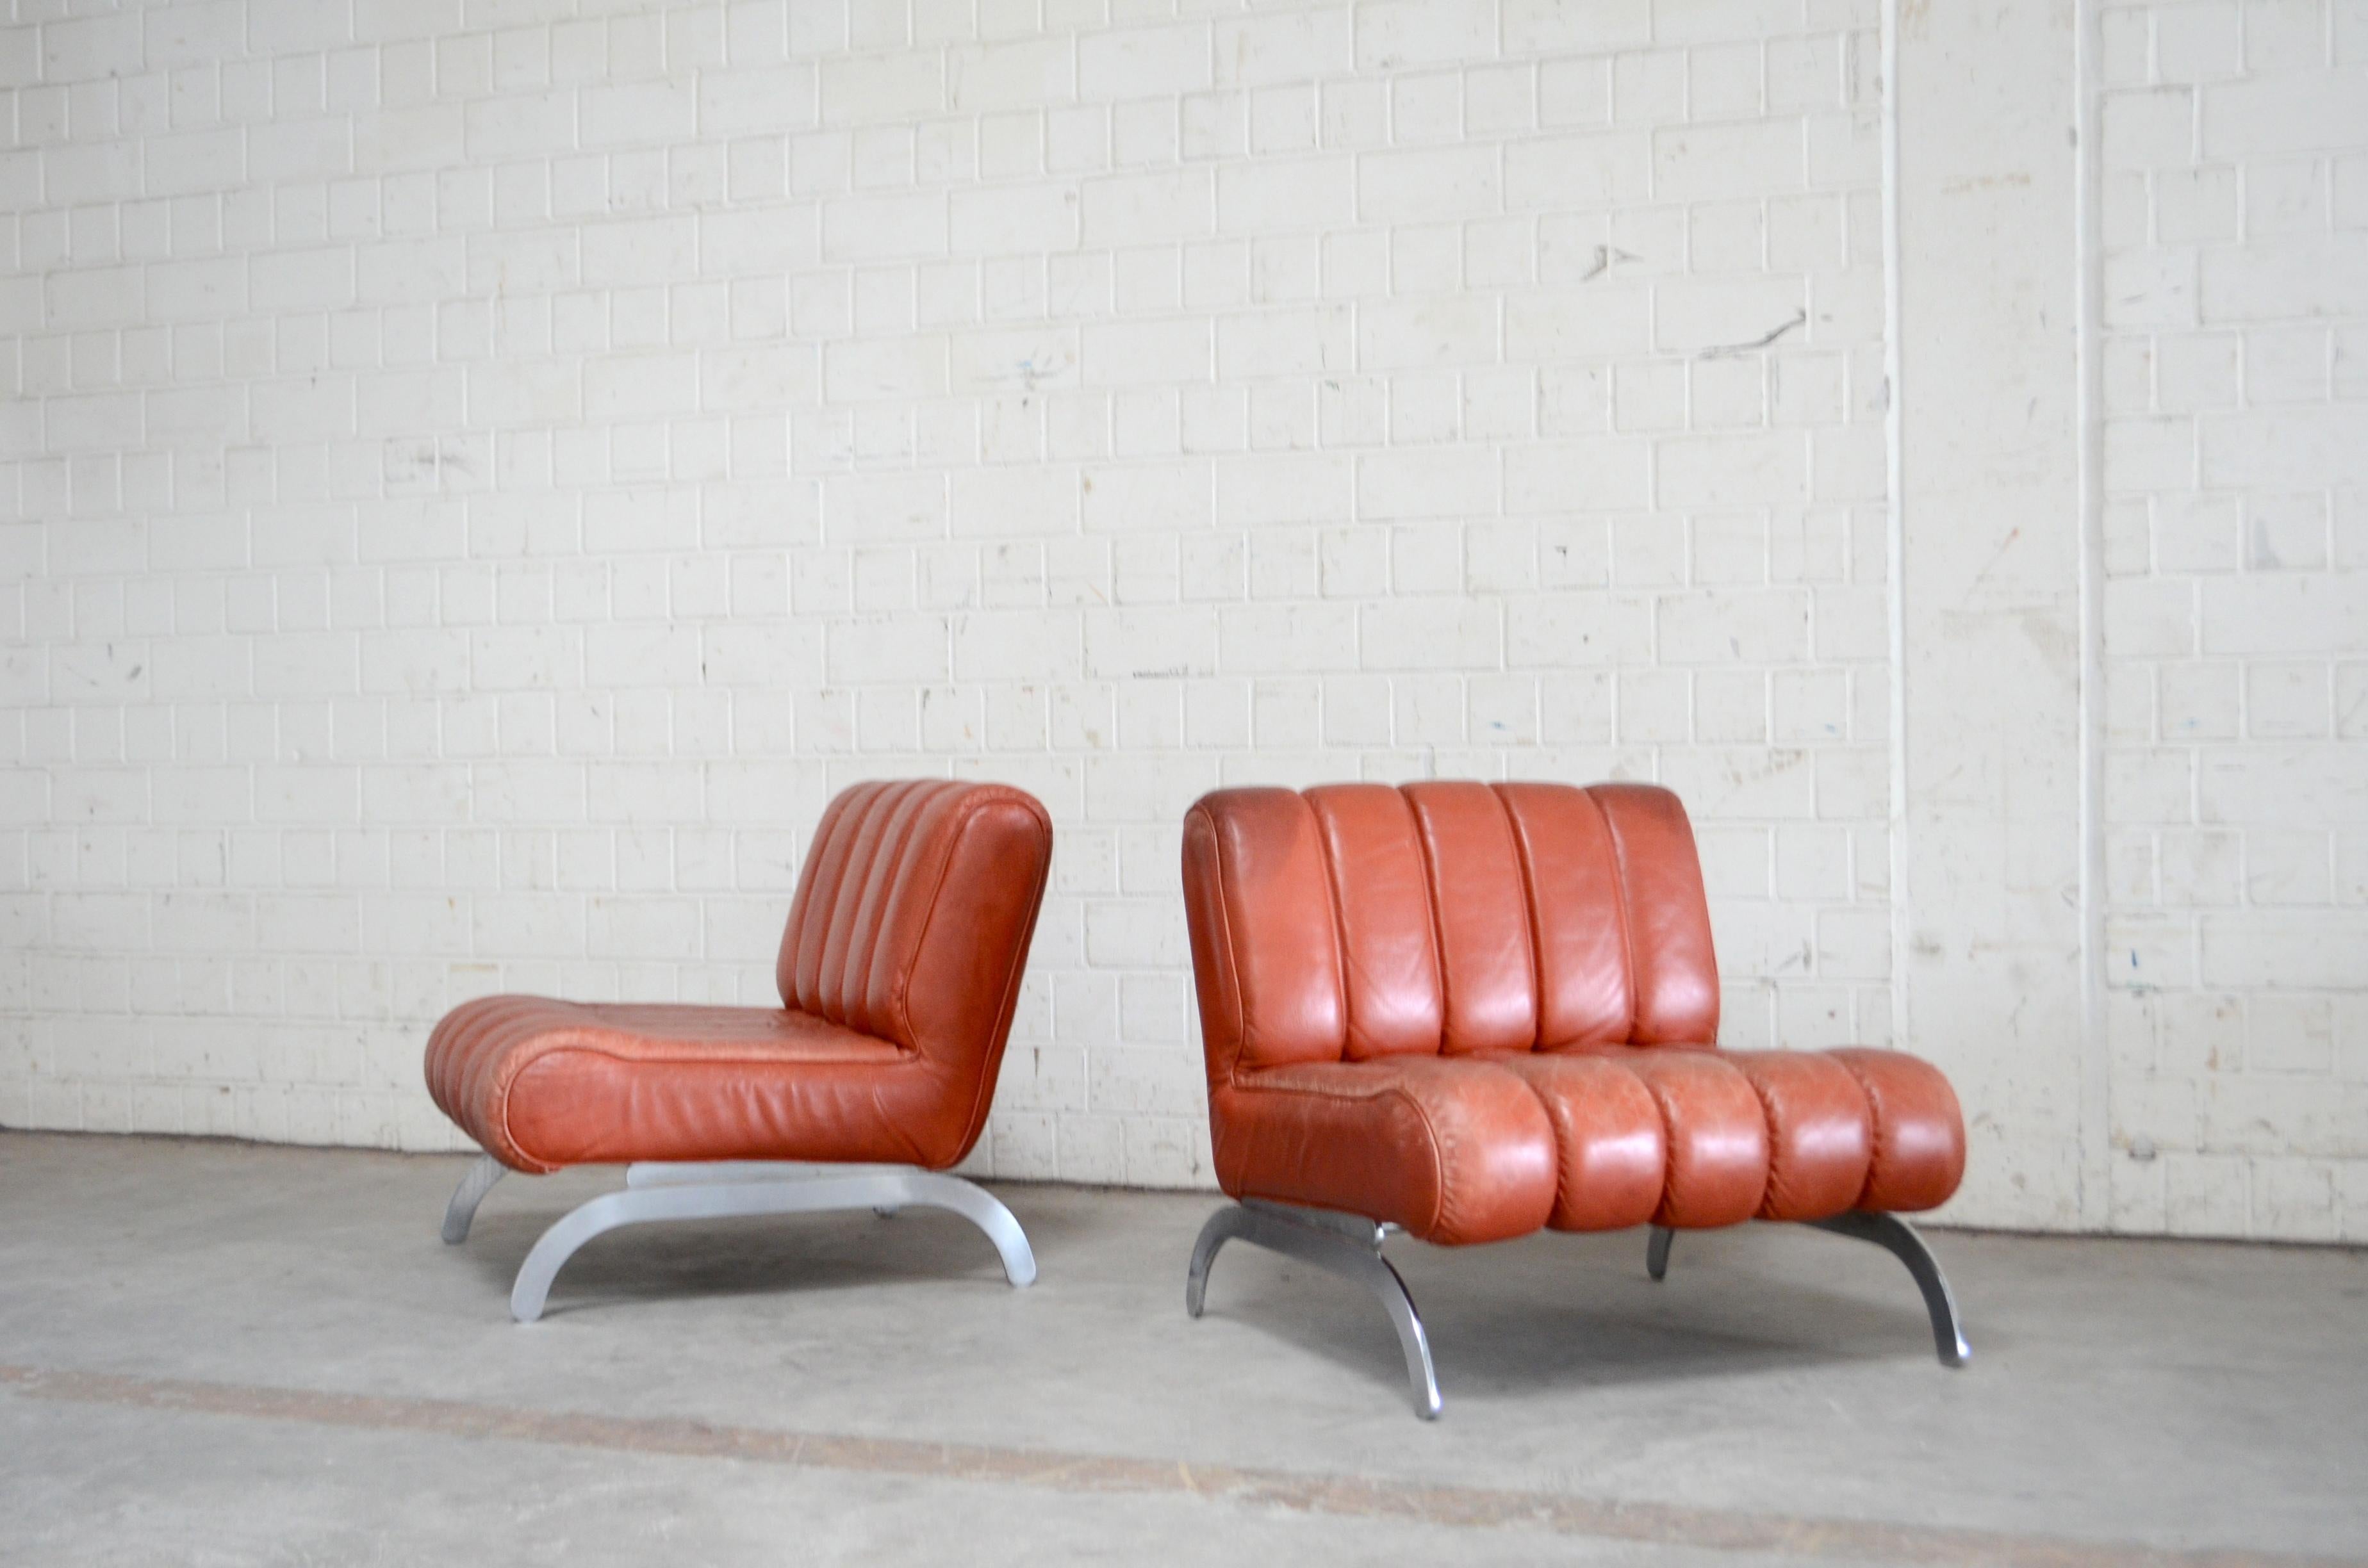 From austrian manufacture Wittmann comes this great pair of lounge chairs.
Model independence. Design year 1963.
Red aniline leather and a frame of steel and chrome.
Wittmann is a Austrian company manufacturing high-quality upholstered furniture